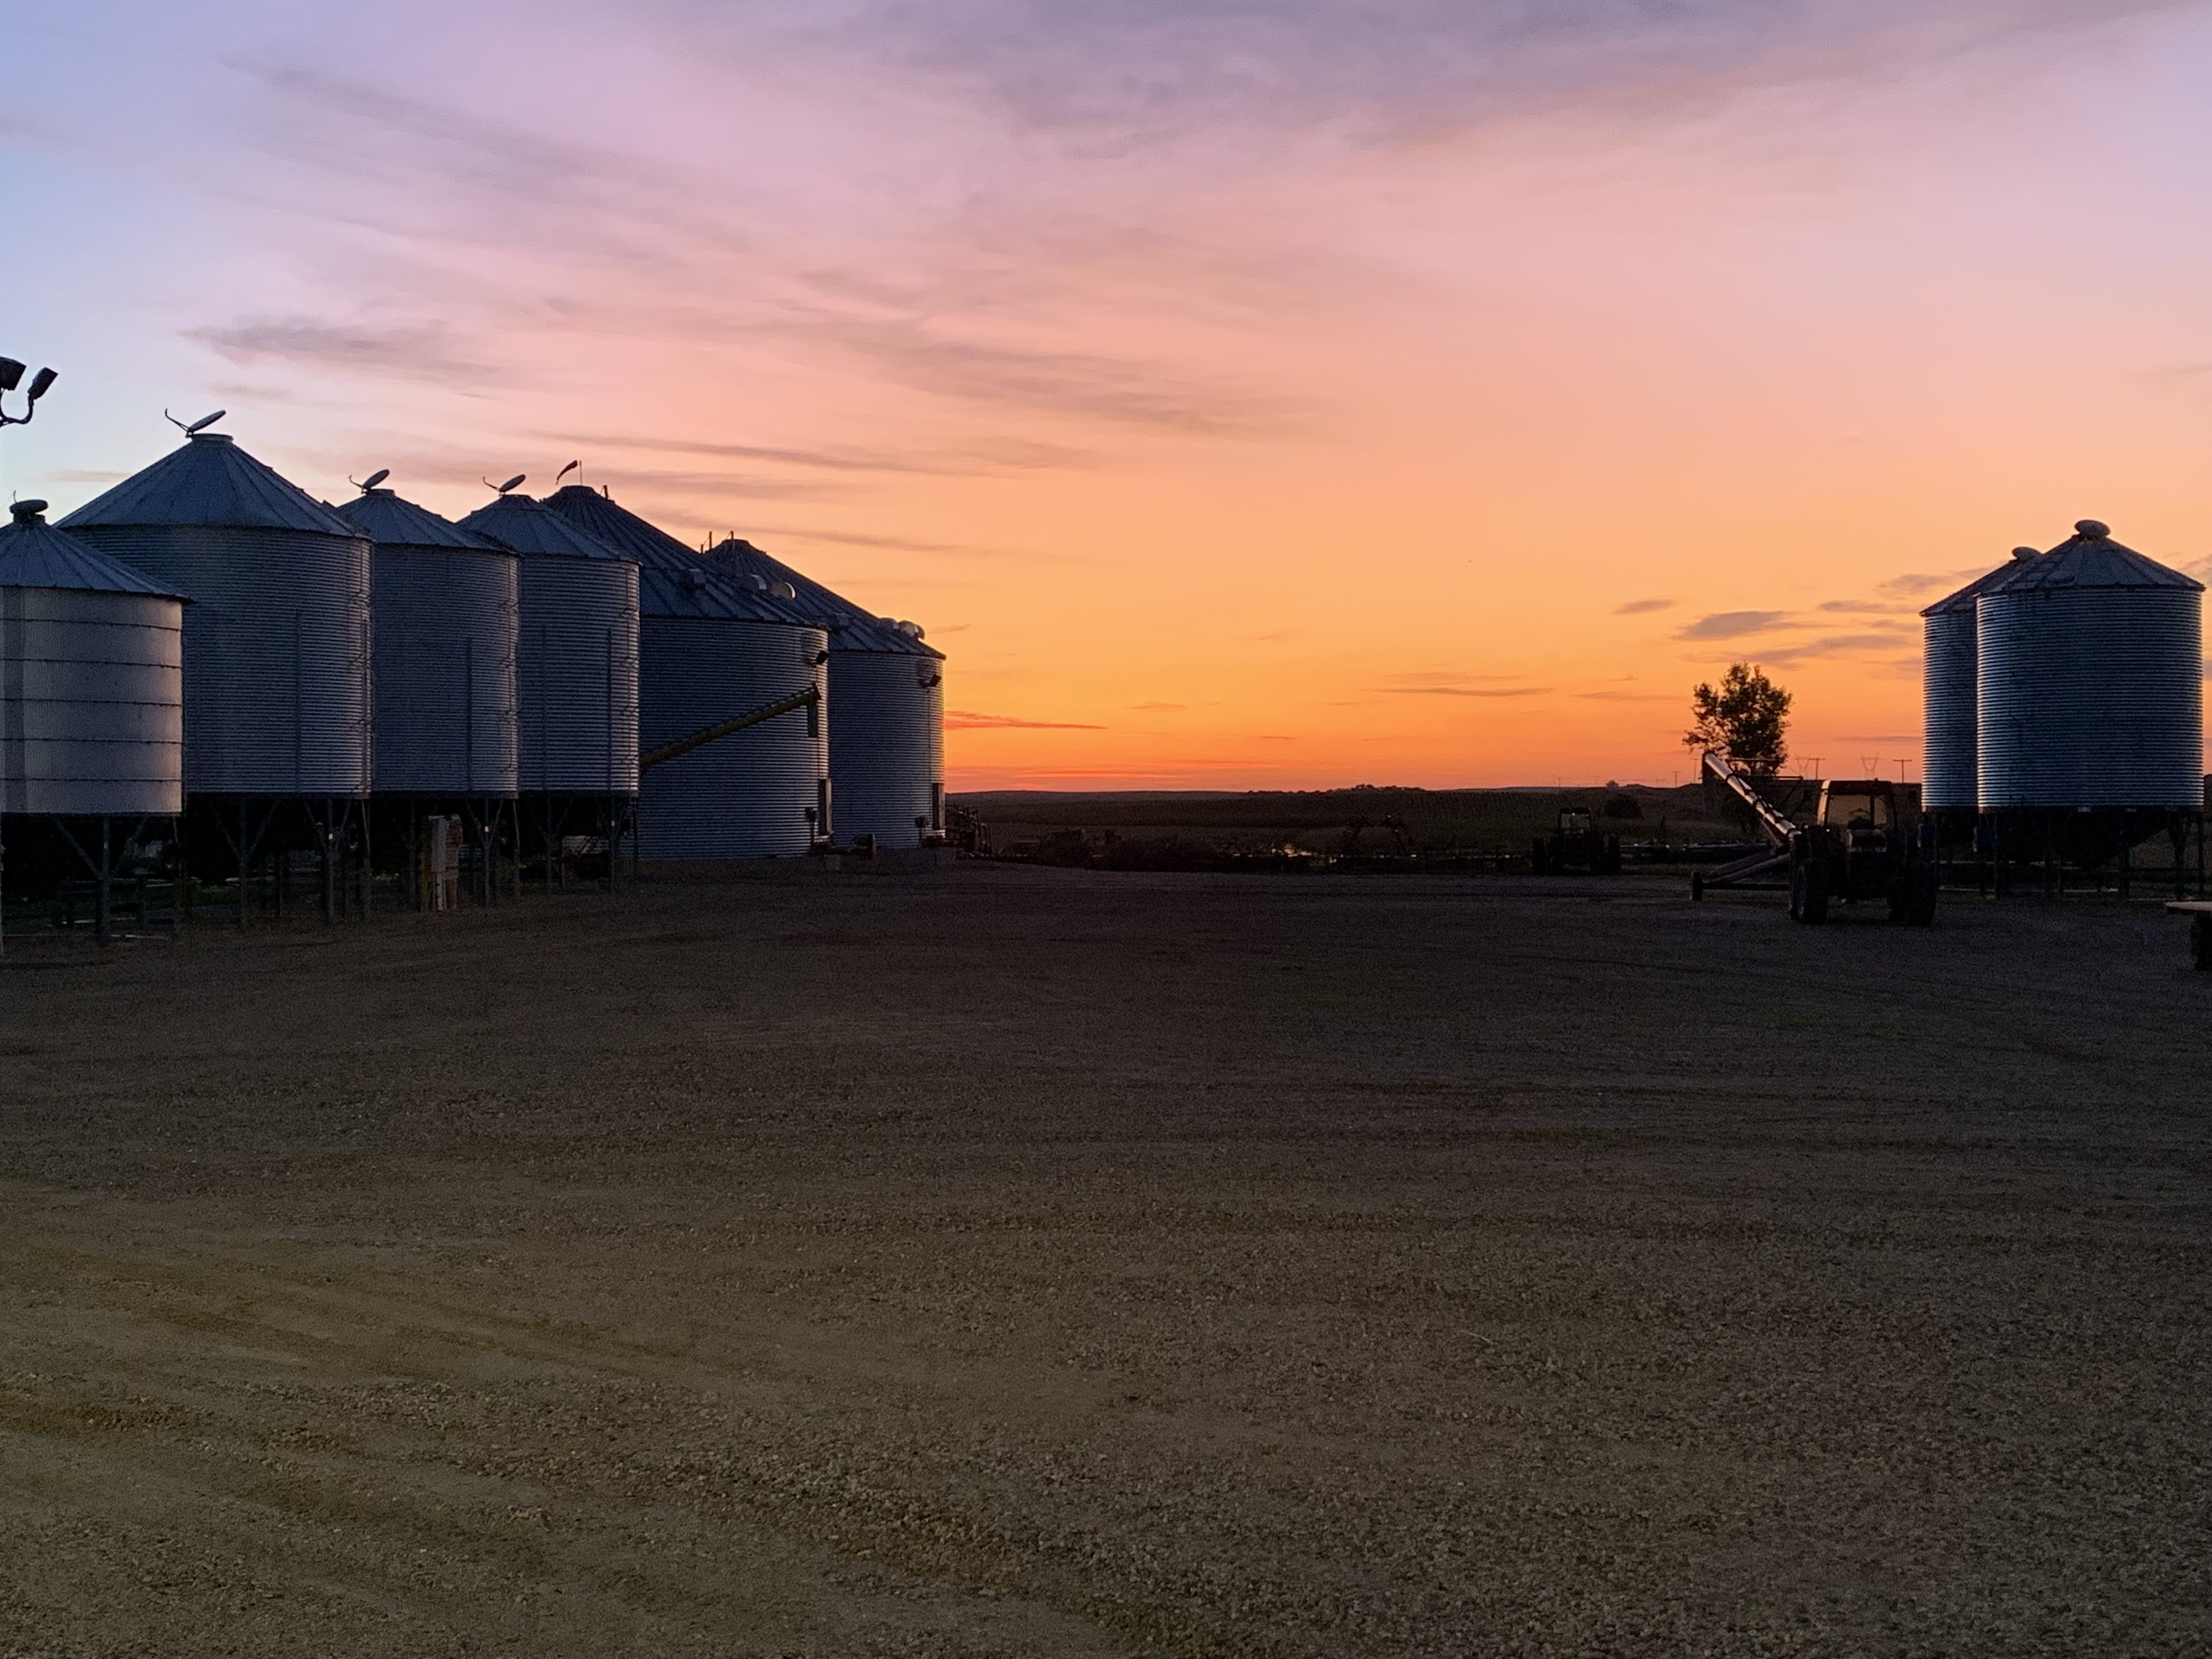 Afternoon Ag News, March 30, 2021: USDA to release Prospective Plantings report this week